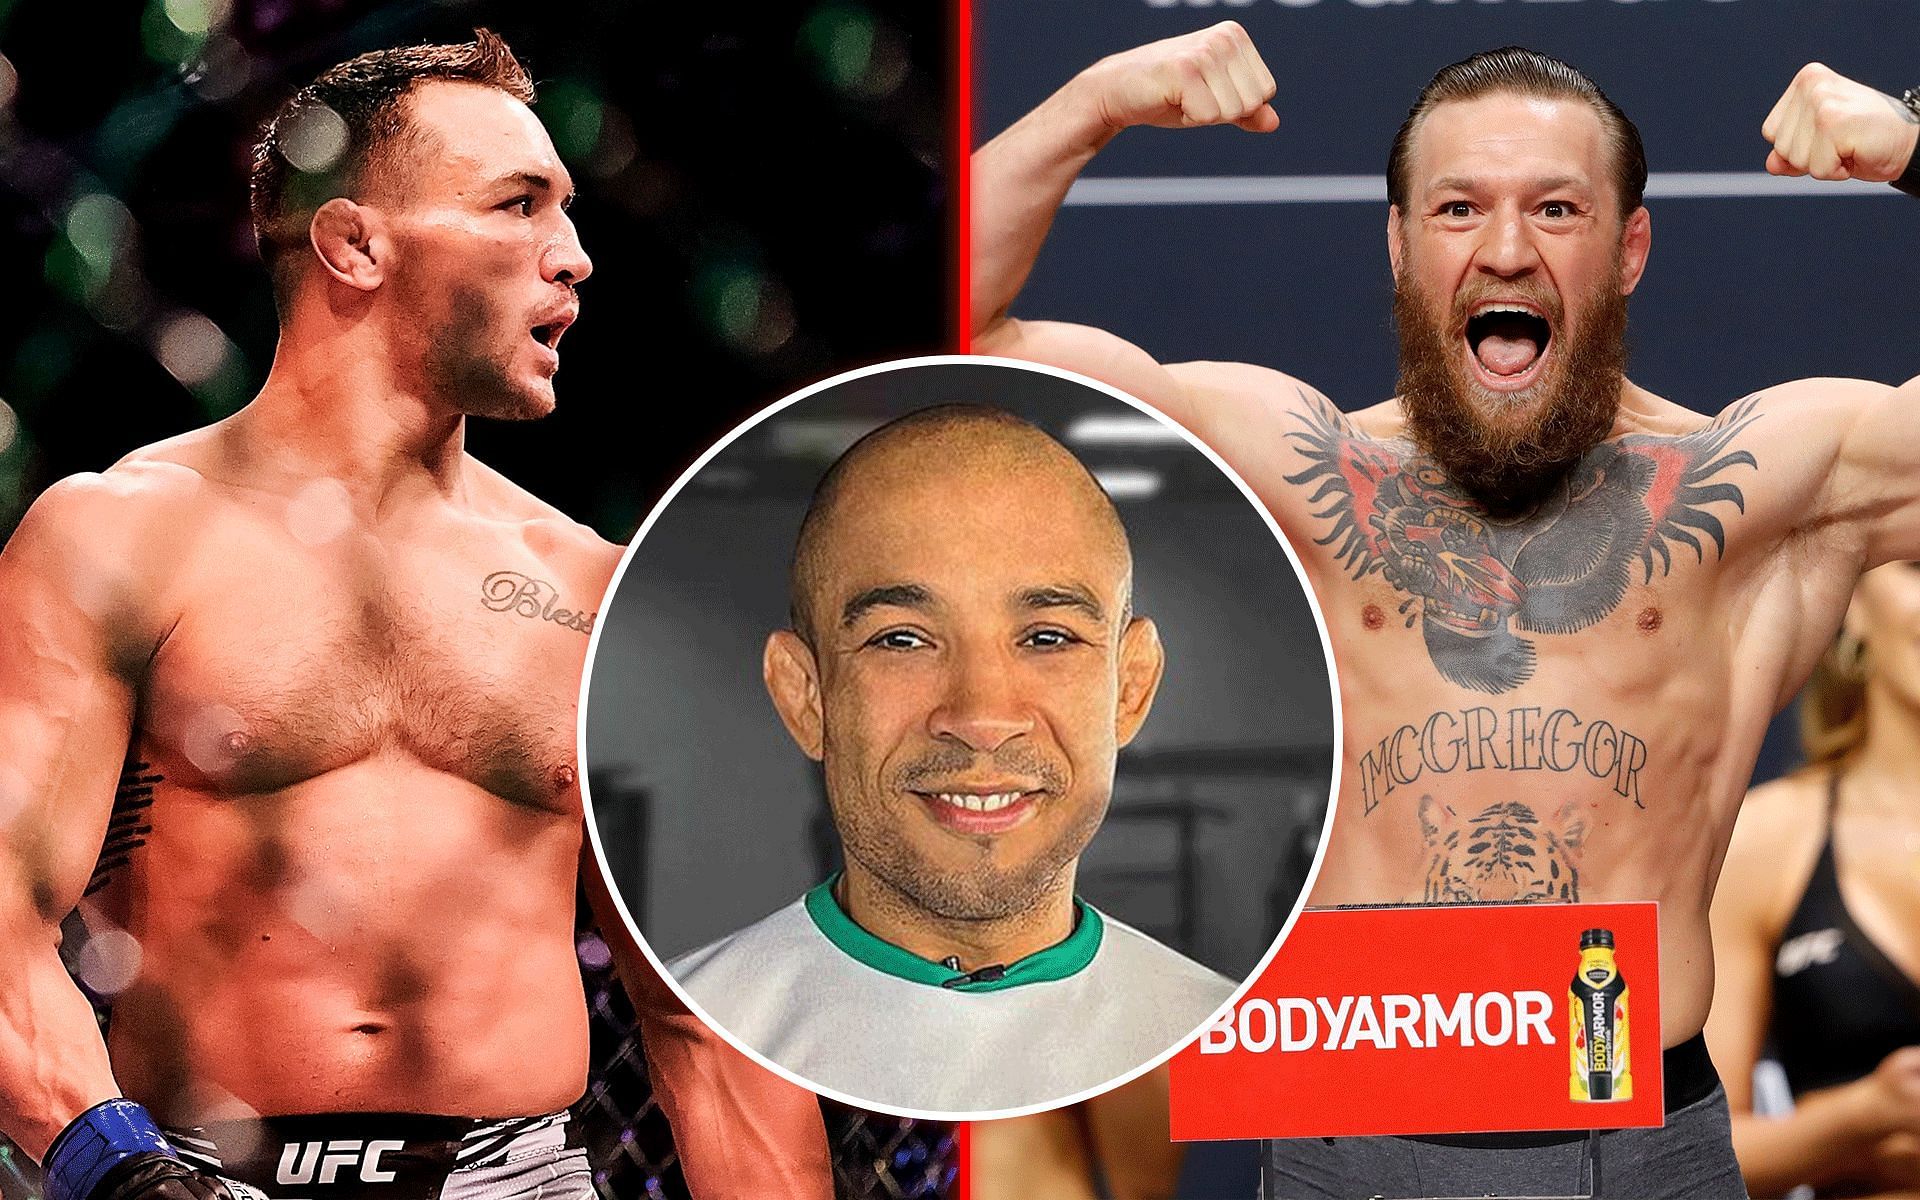 Jose Aldo (middle) seemingly hopes to see Conor McGregor (right) defeat Michael Chandler (left) at UFC 303 [Images courtesy: @josealdojunioroficial on Instagram and Getty Images]